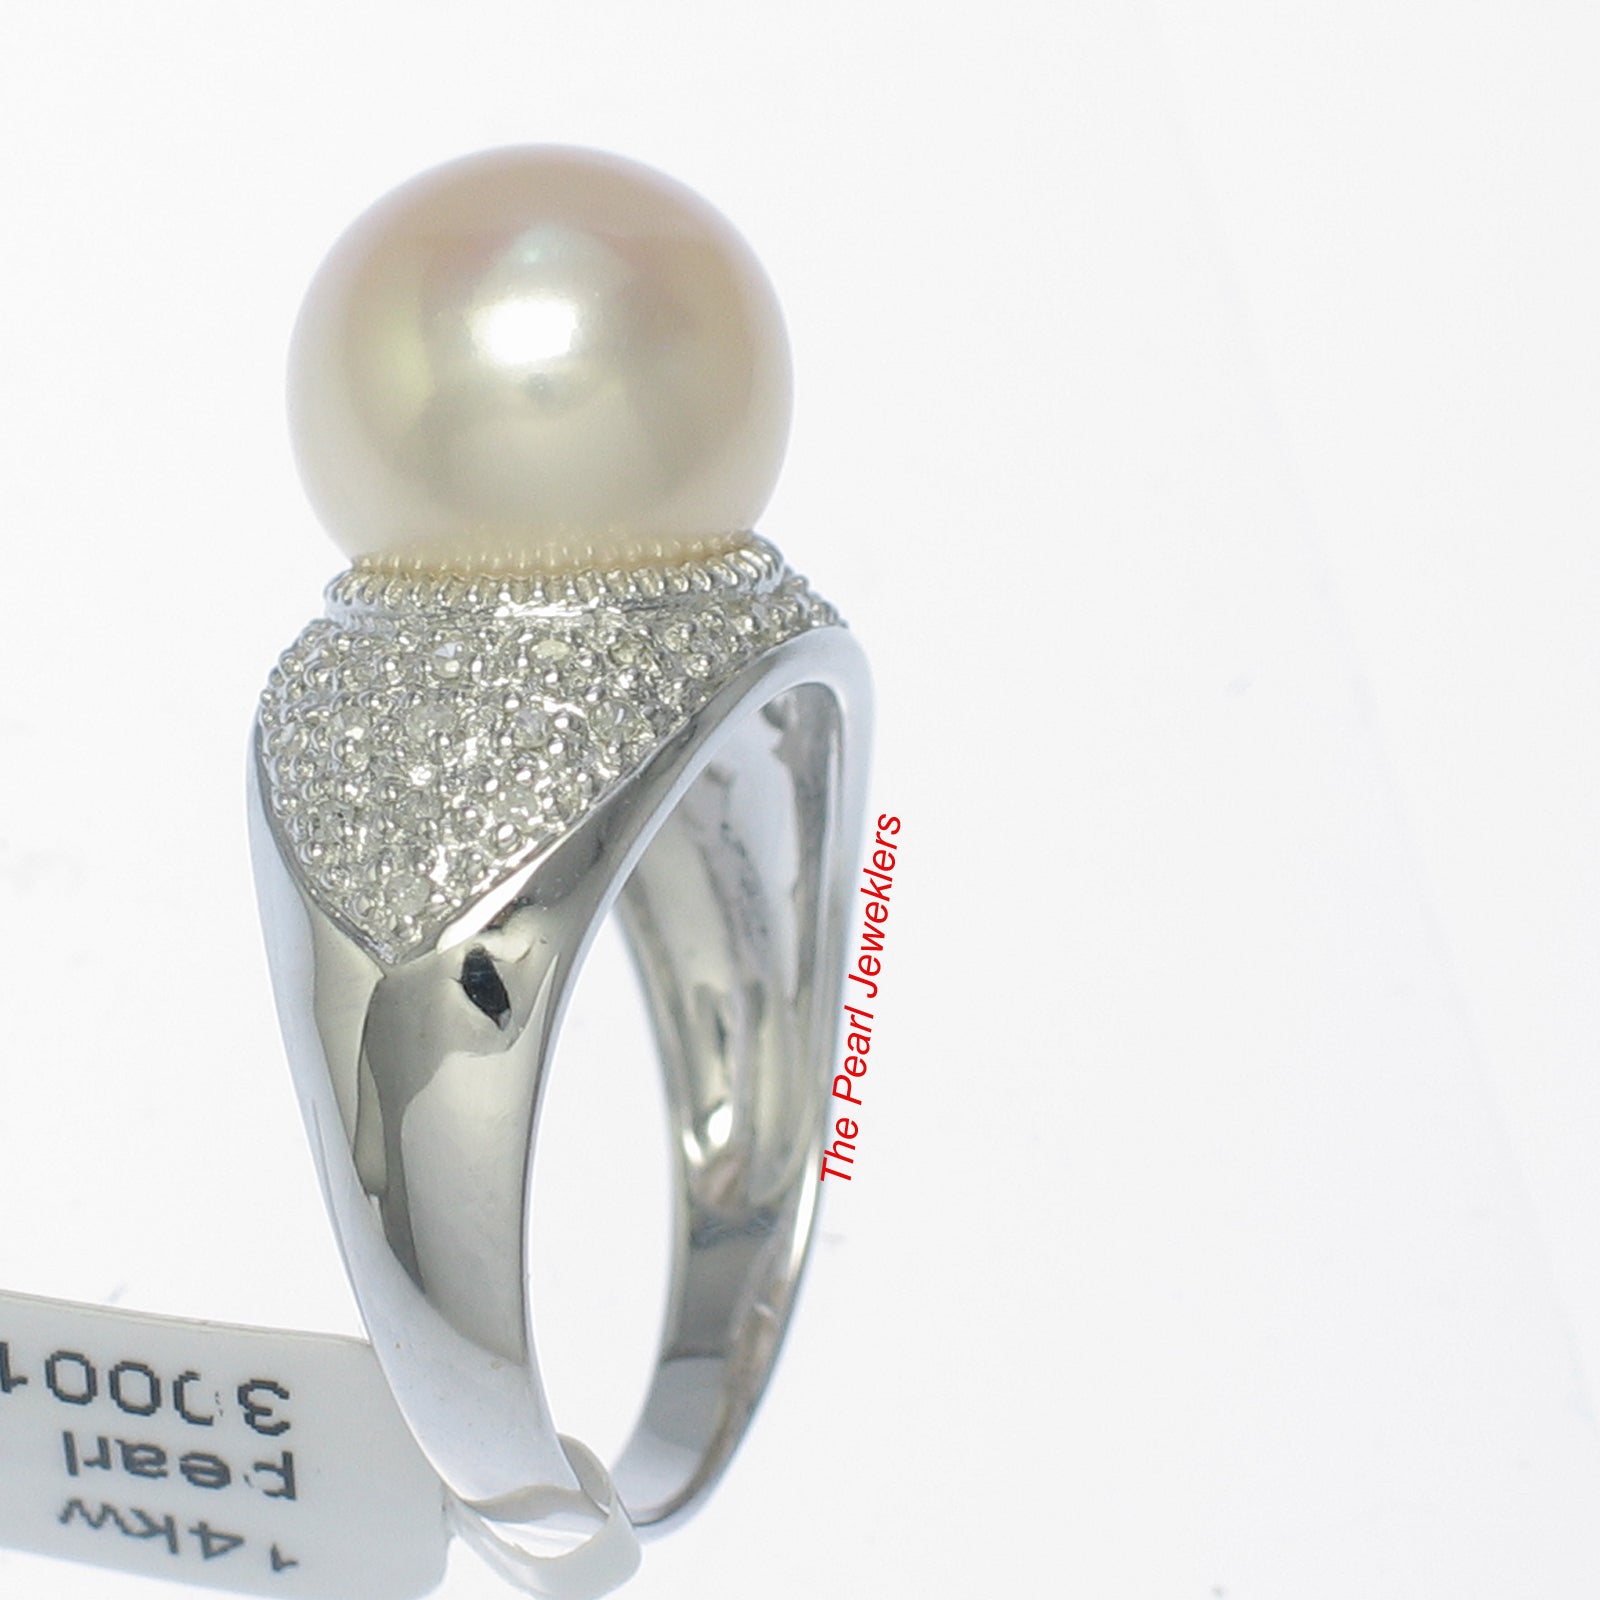 Pink Pearl Ring | Desiderate – Desiderate PTY LTD